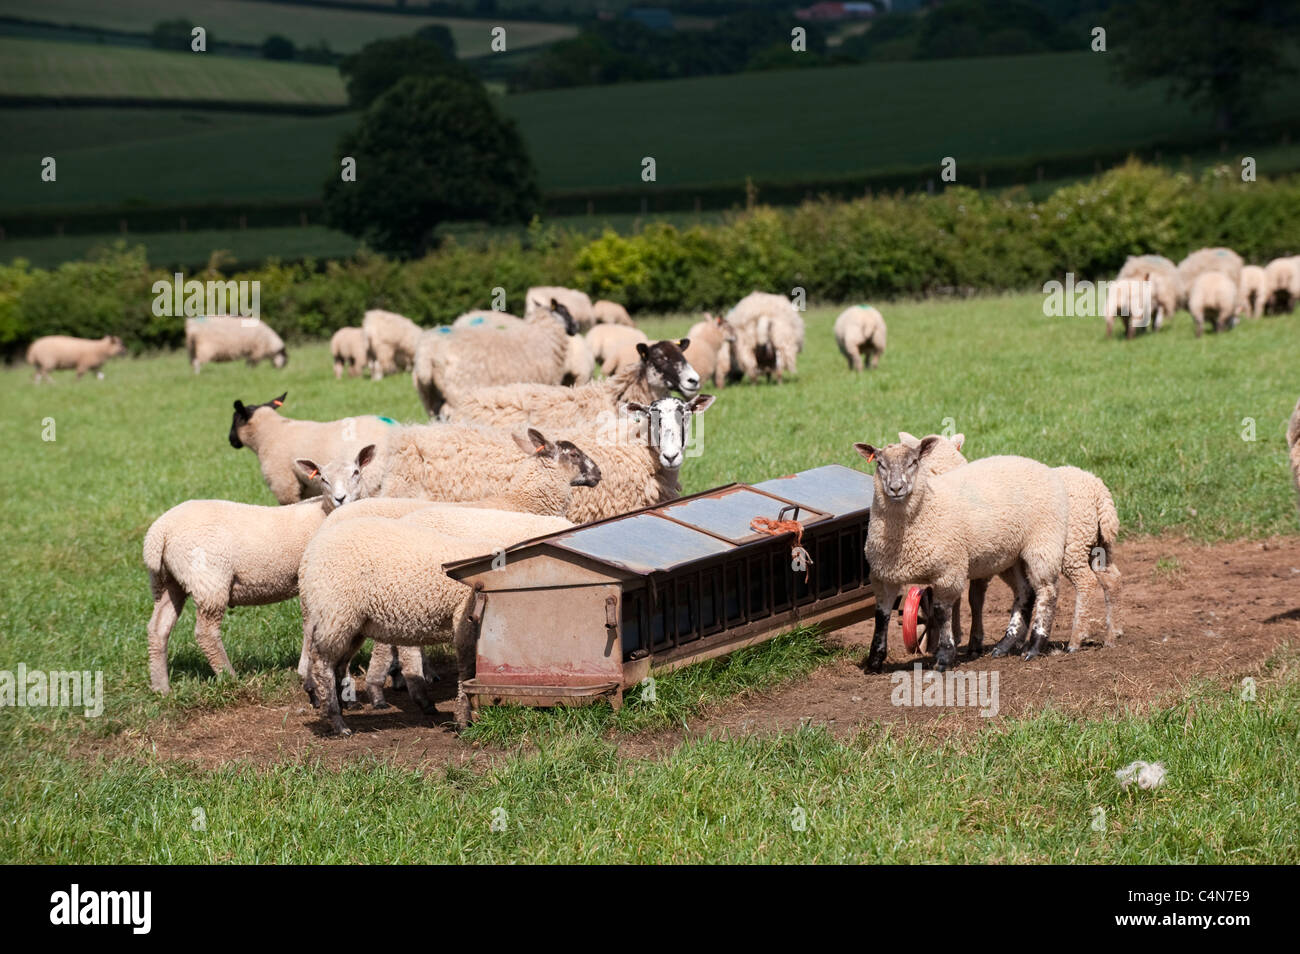 Lambs around a creep feeder, which allows lambs to feed but not ewes. Stock Photo